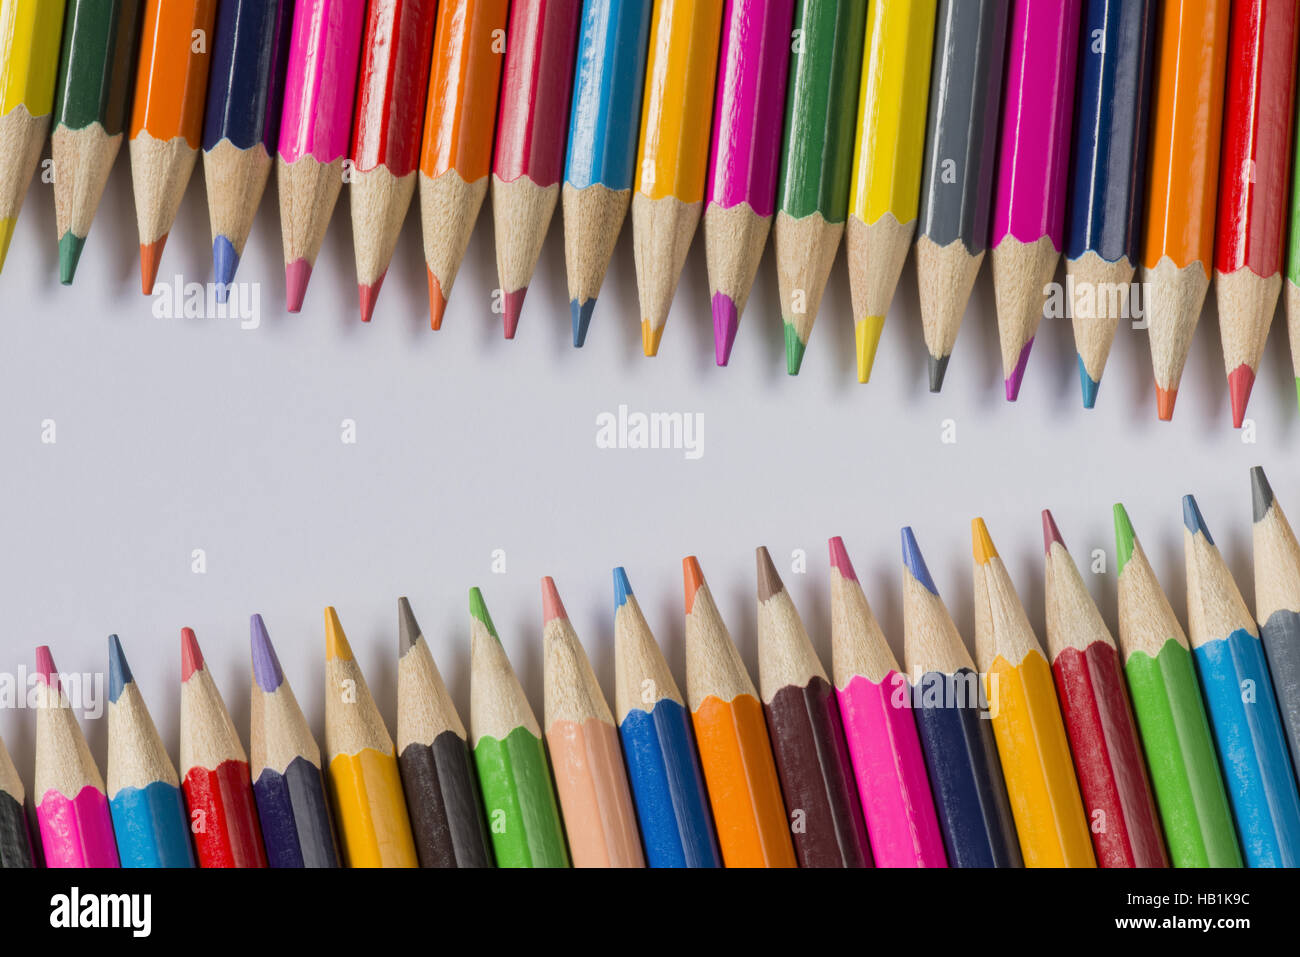 collection of colored wooden pencils Stock Photo